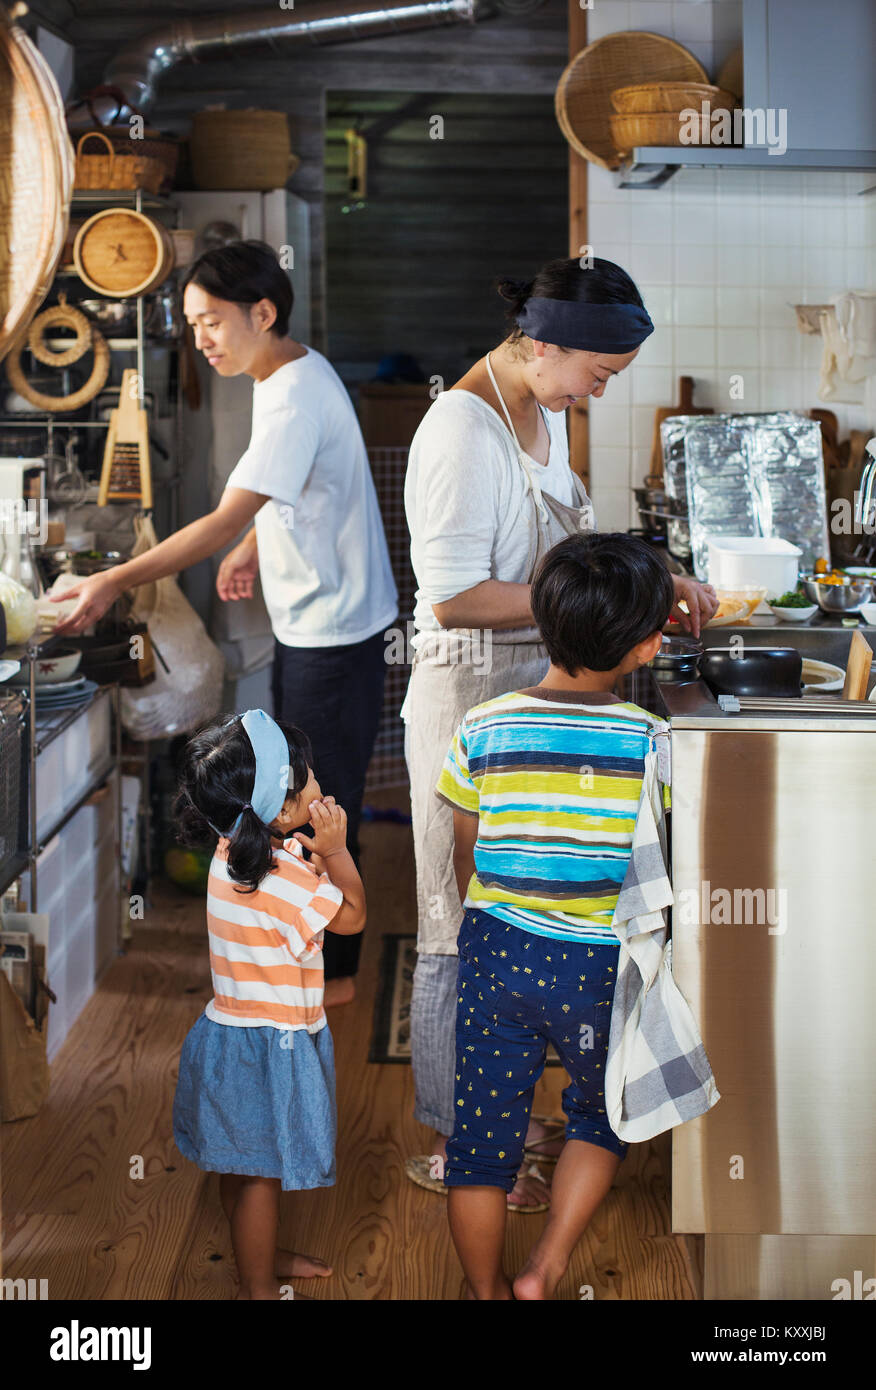 Man, woman wearing apron, boy and young girl standing in a kitchen, preparing food. Stock Photo